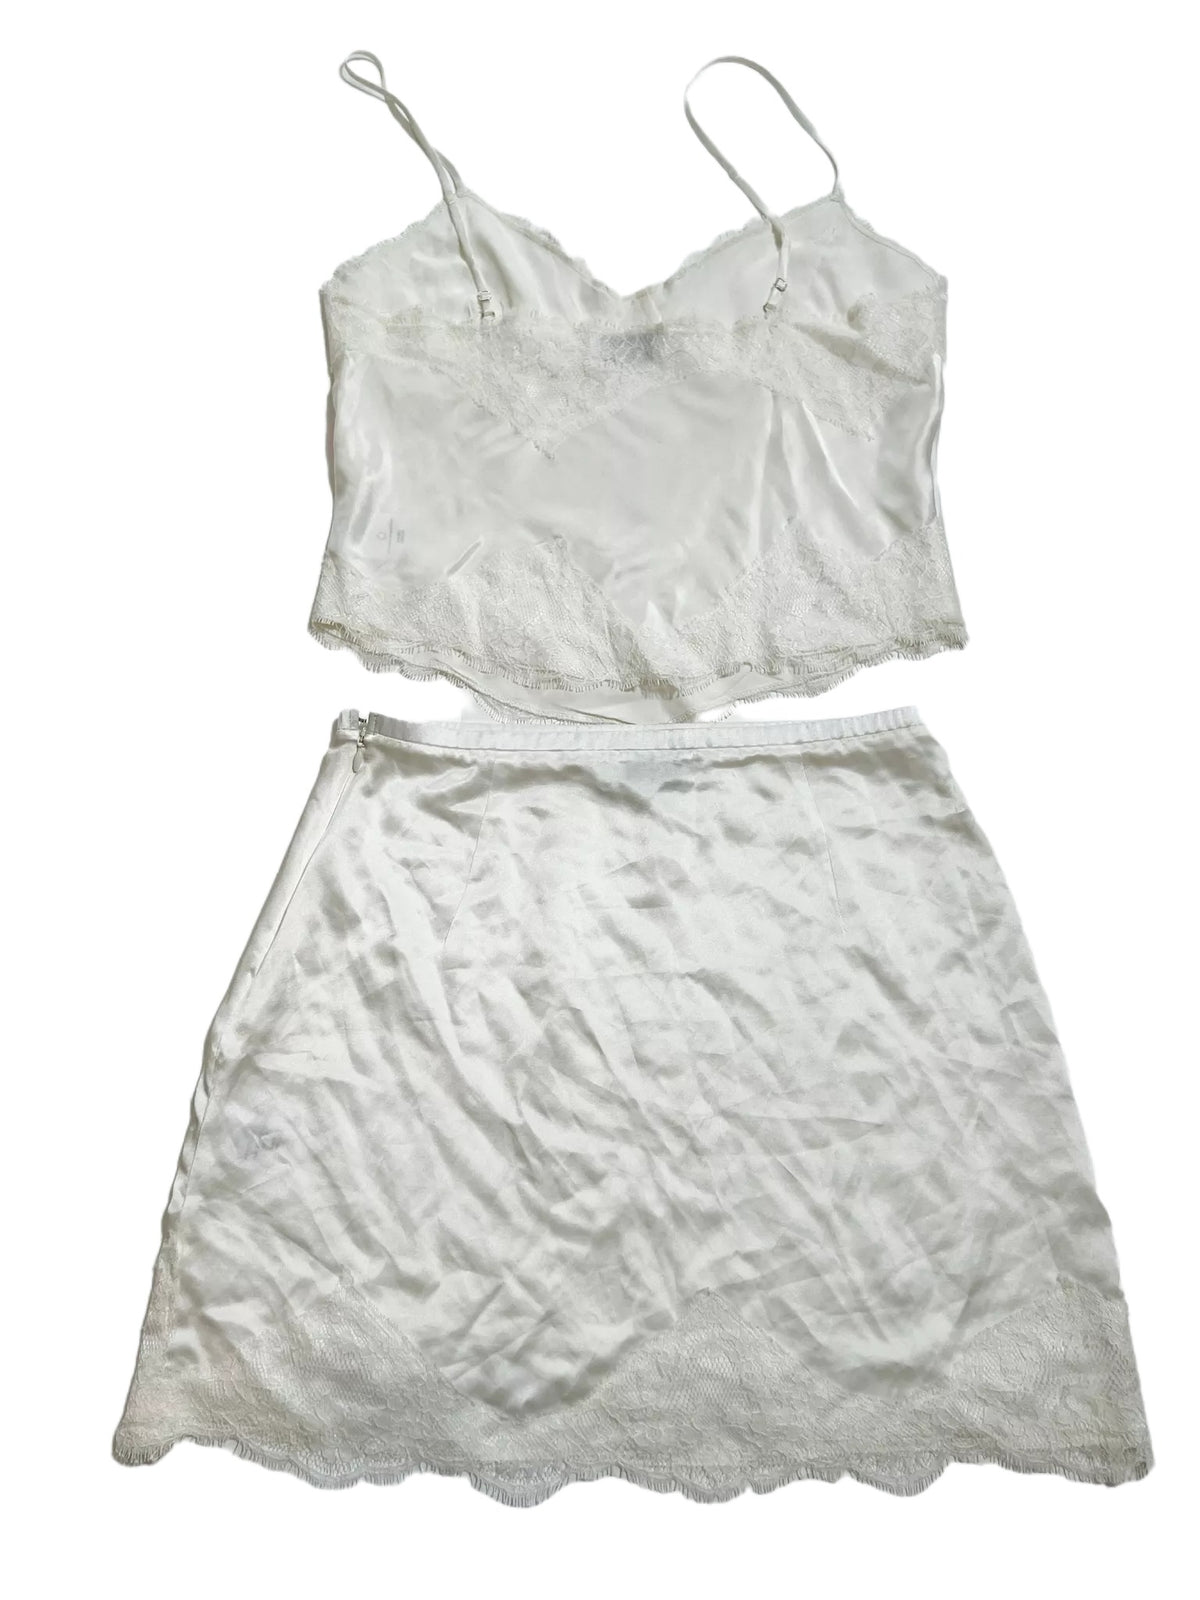 All My Love- White Lace Tank and Mini Skirt Set